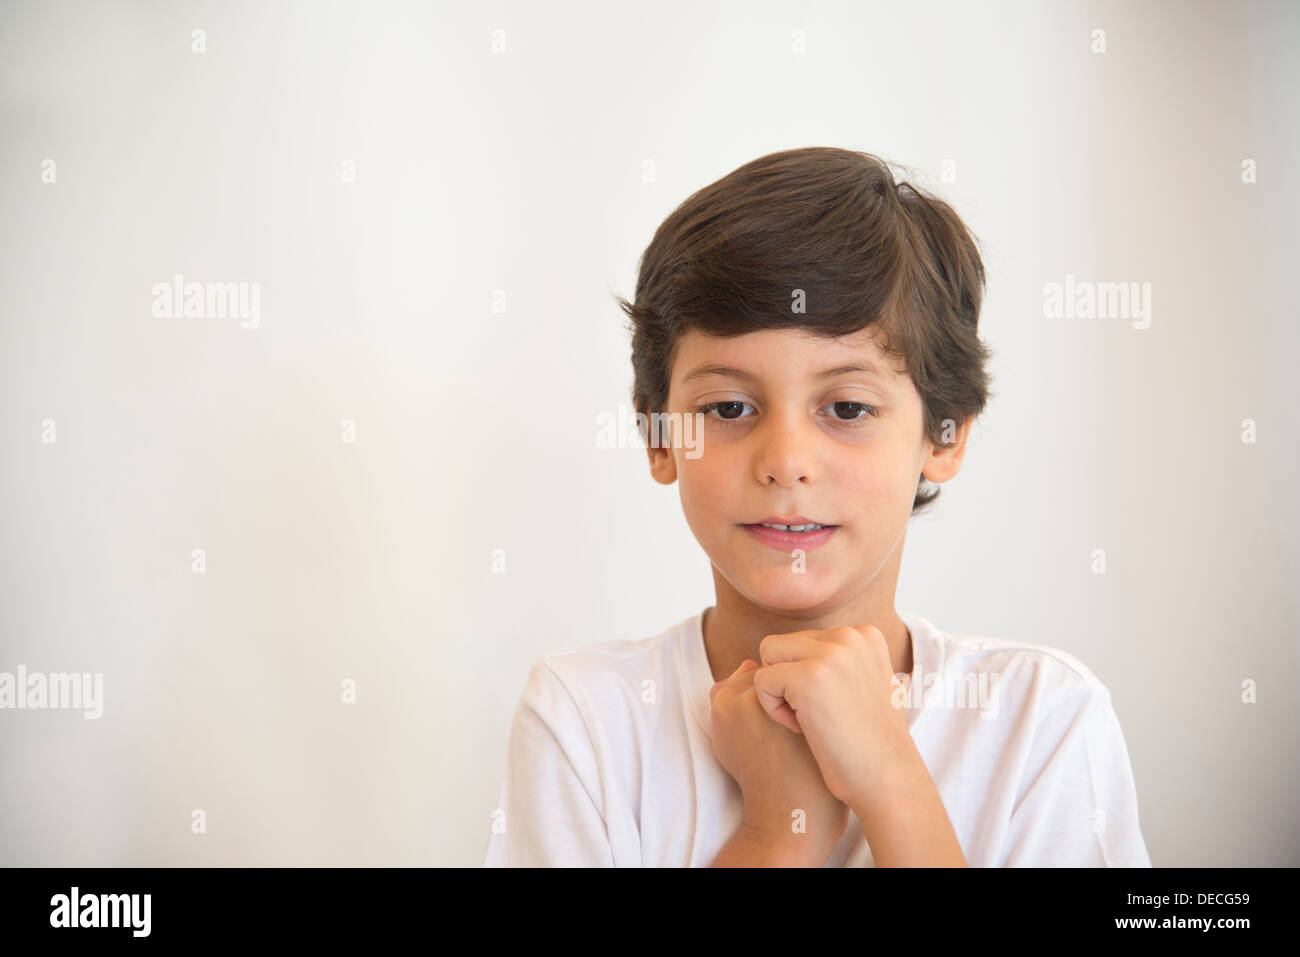 boy, kid, schoolboy, expecting, expectation, excitement, waiting for, surprise, childish,  dreaming, waiting for, happy, Stock Photo